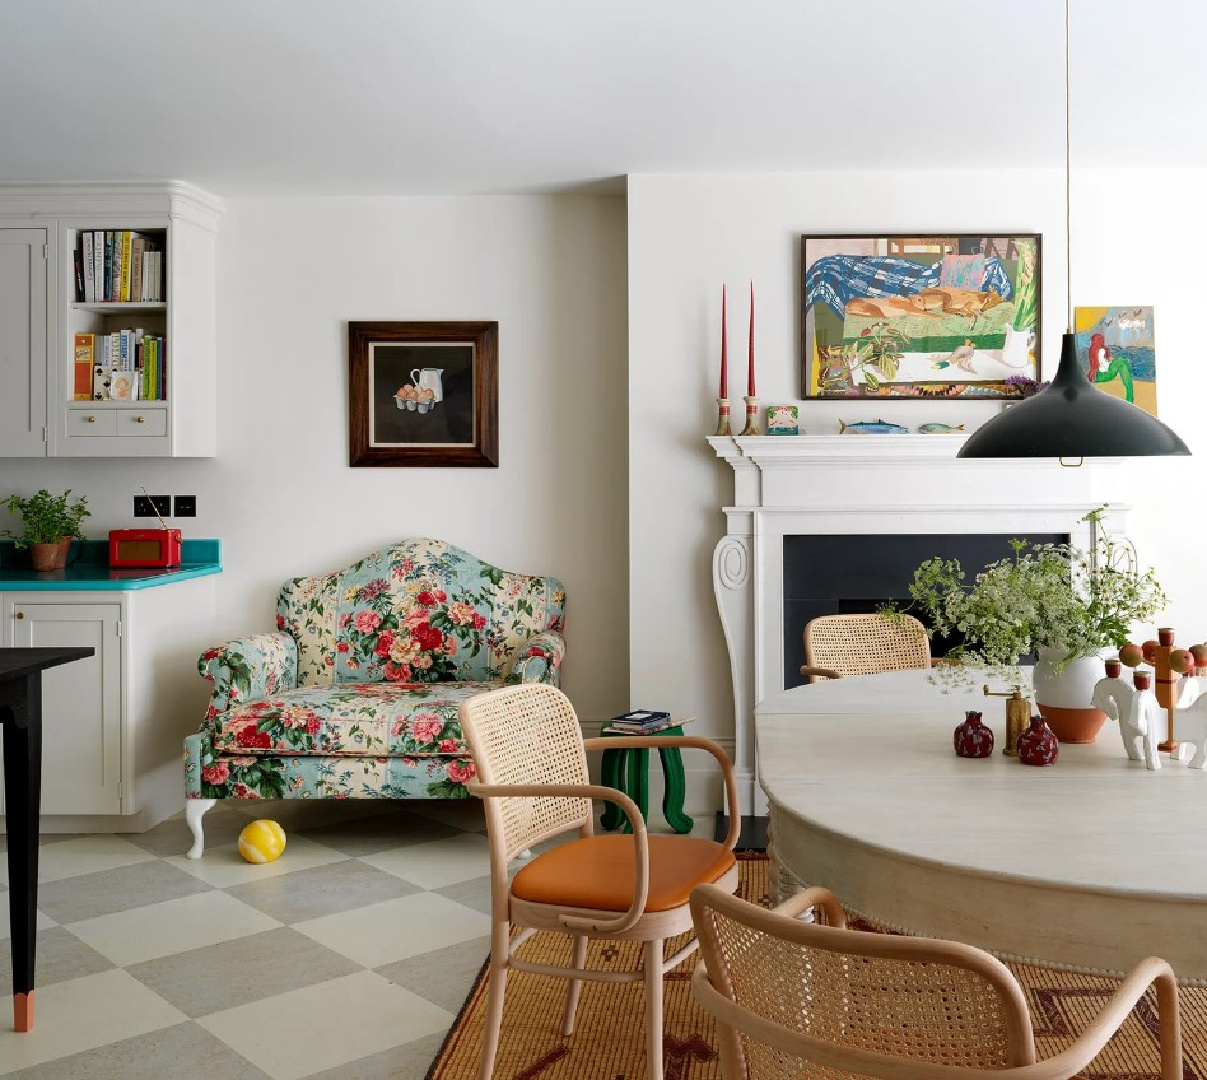 Lovely interior by Beata Heuman with floral settee - photo: Simon Brown.